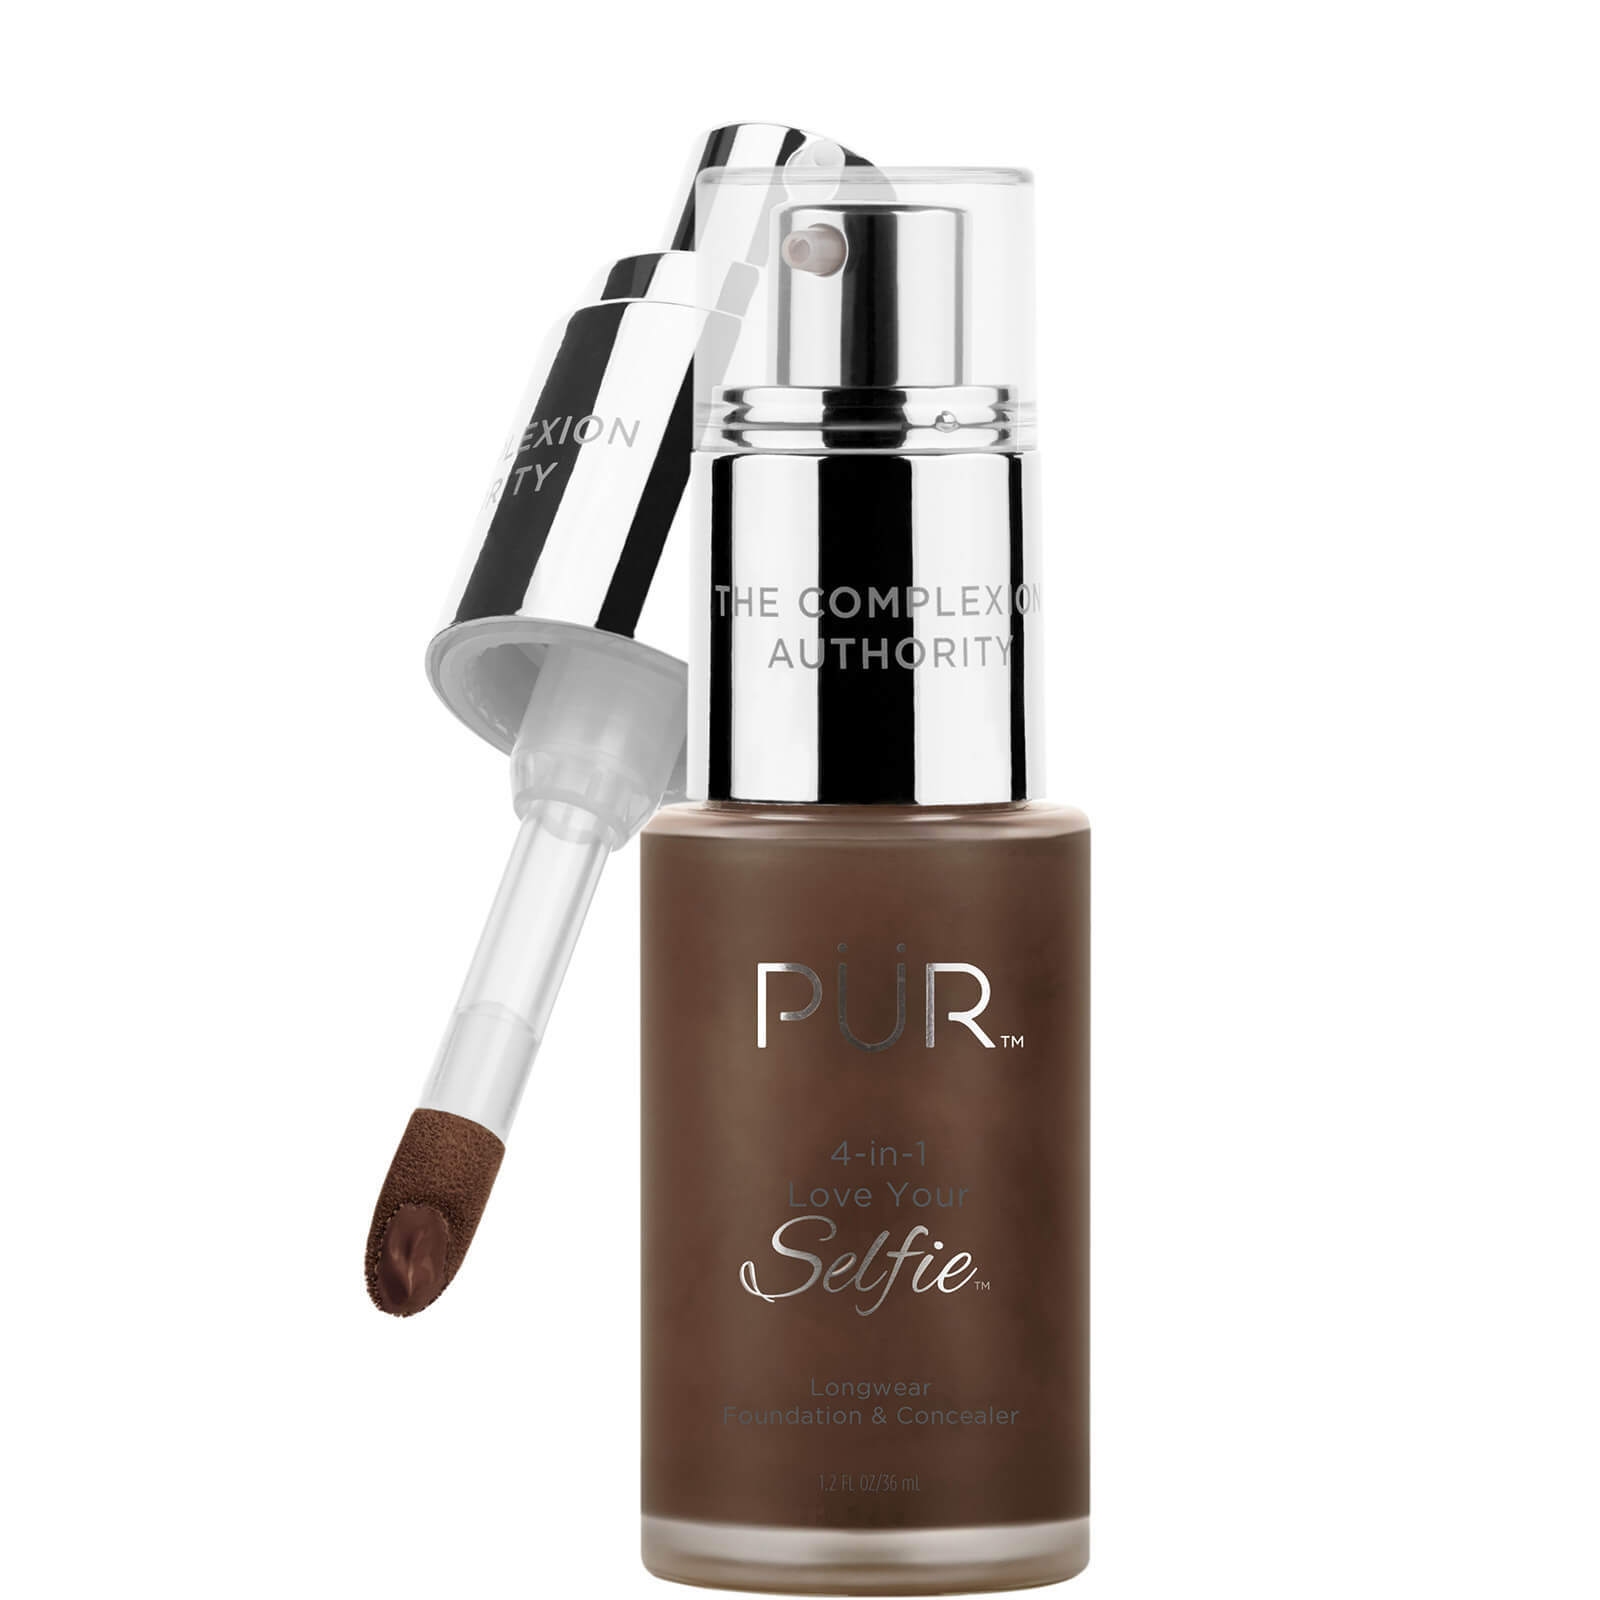 Pür 4-in-1 Love Your Selfie Longwear Foundation And Concealer 30ml (various Shades) In Dpn2/chestnut